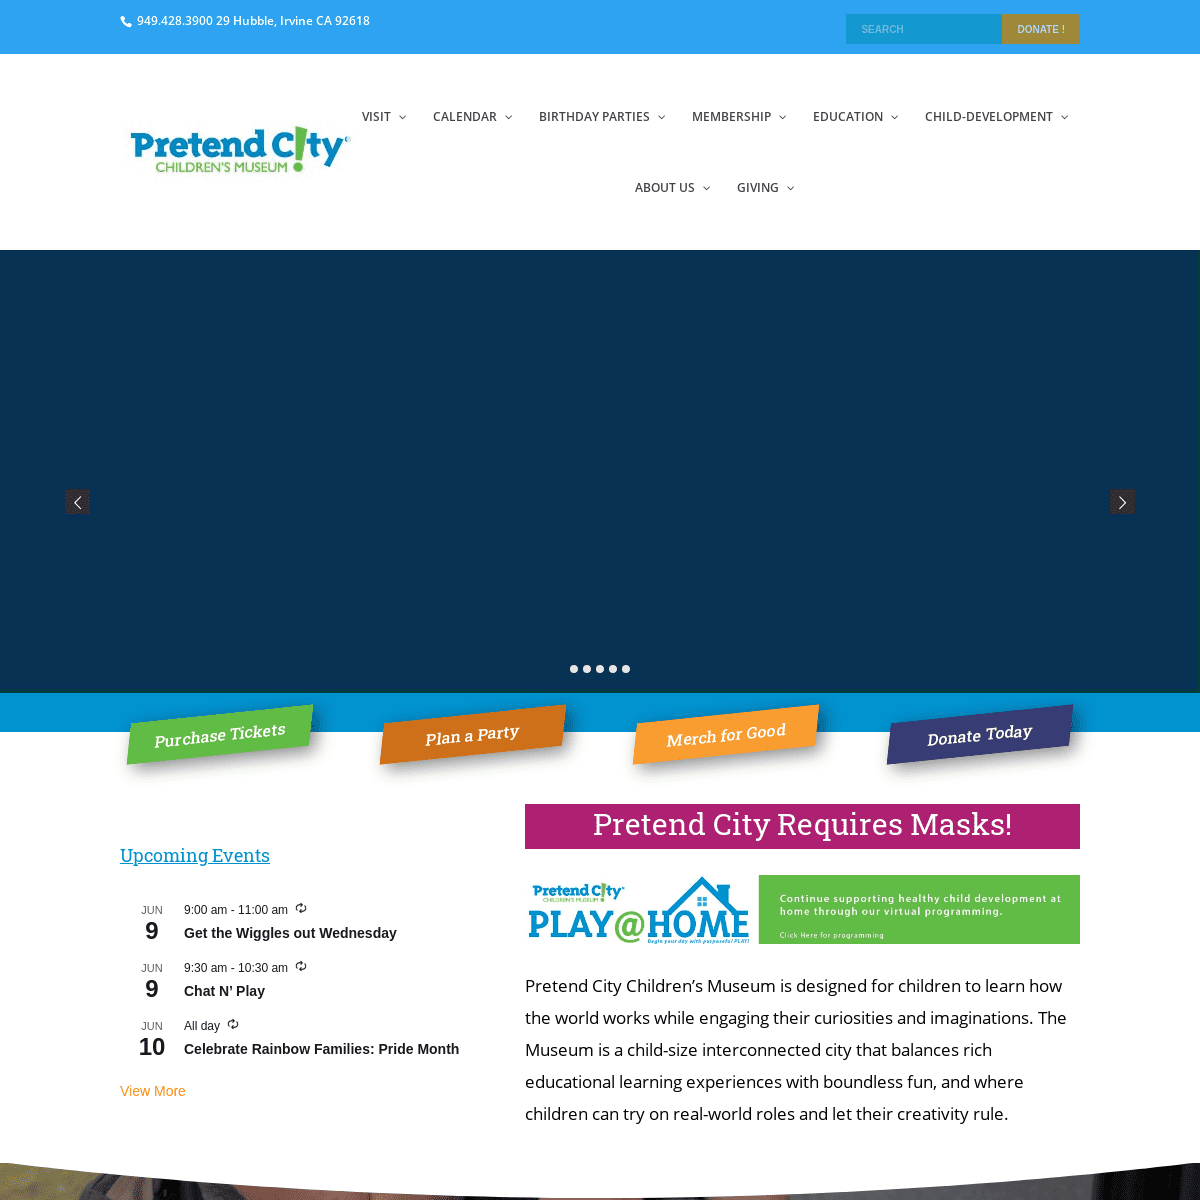 A complete backup of https://pretendcity.org